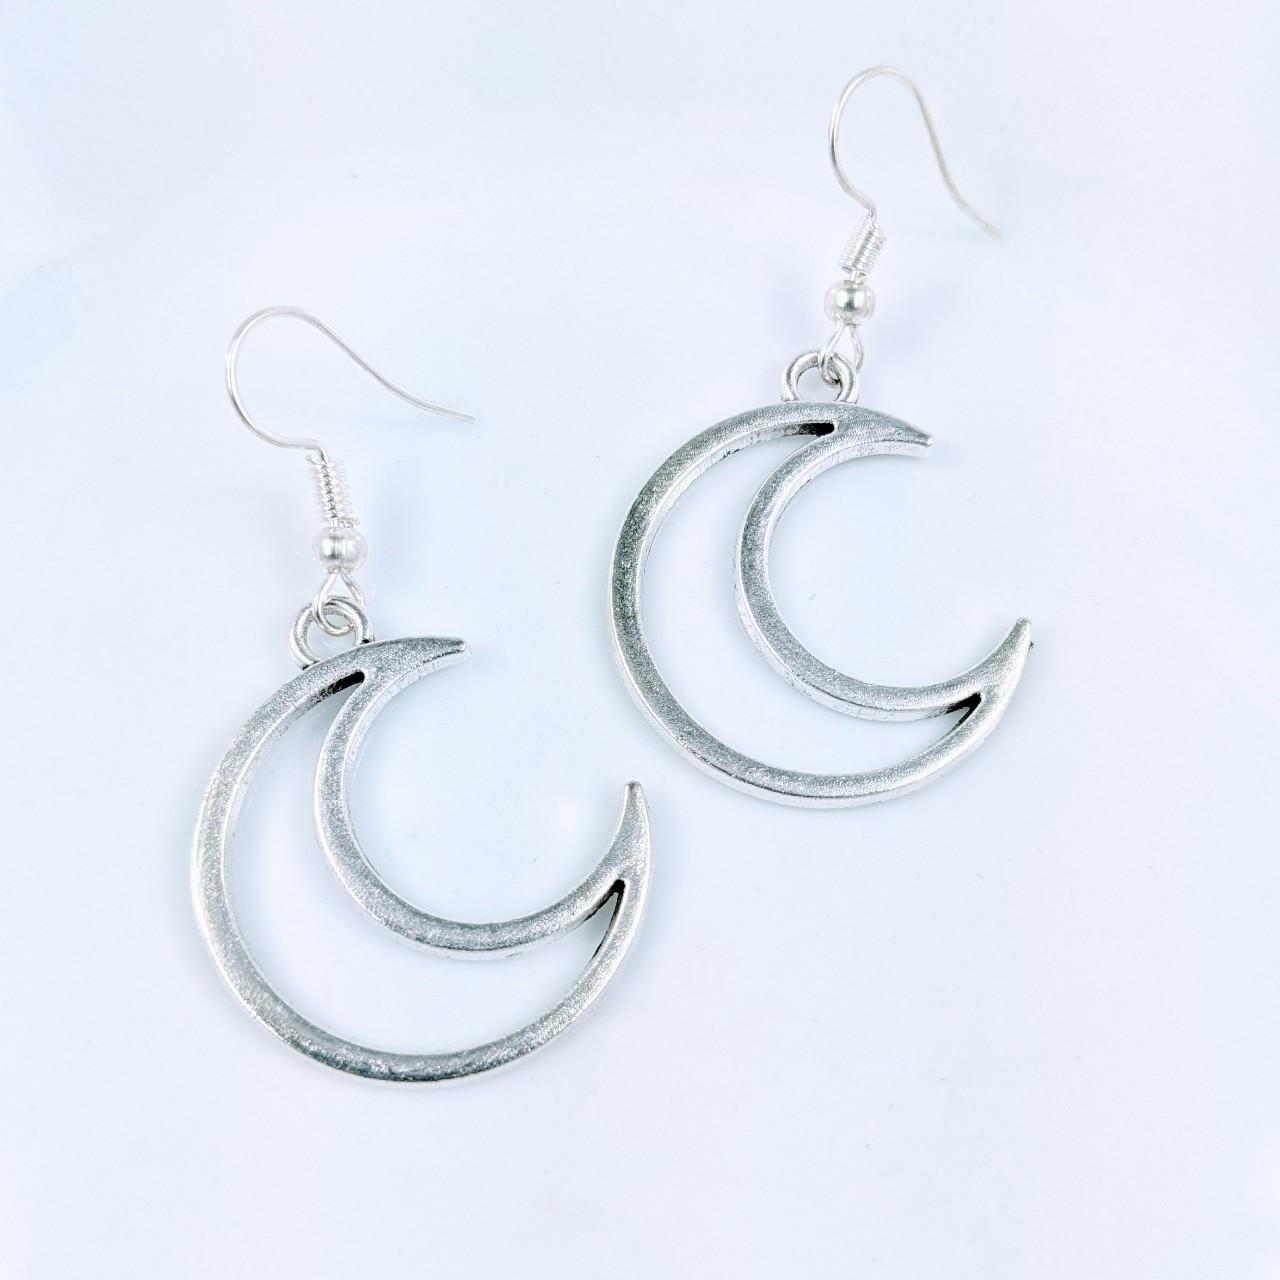 Product Image 1 - Crescent Moon Earrings
Brand new. 

Made